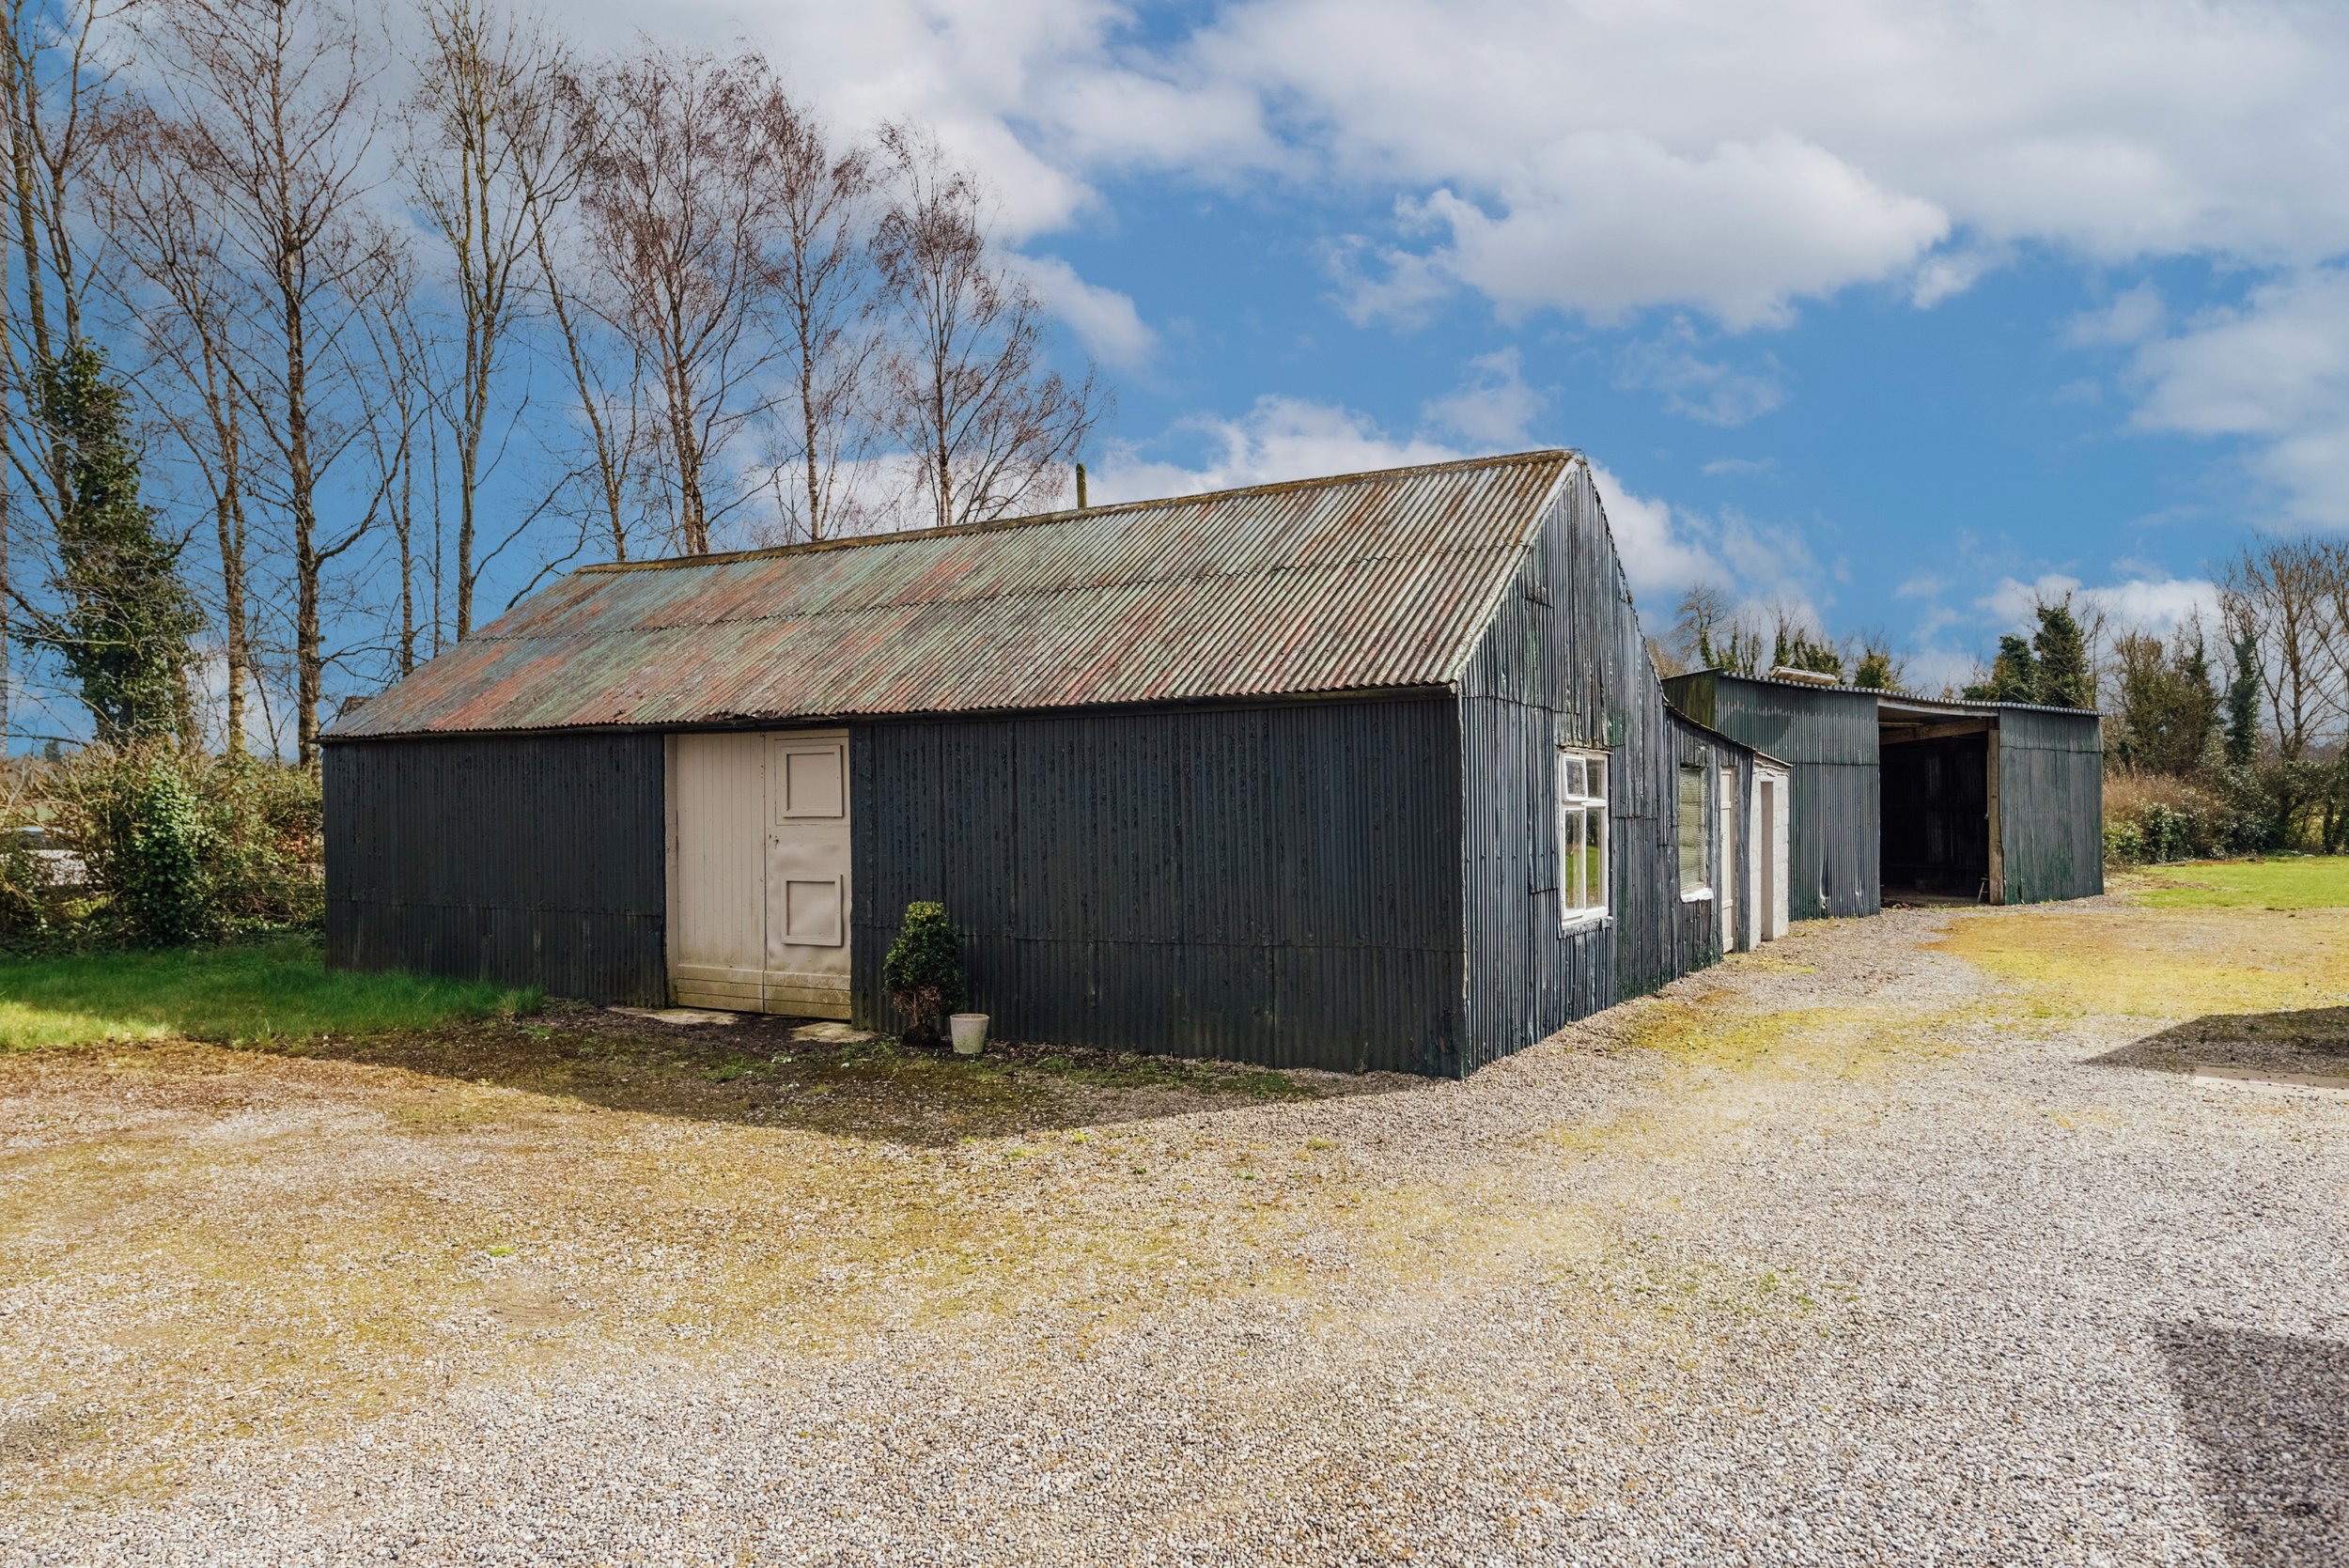 Tully East, Kildare - For Sale - Sheds.jpg